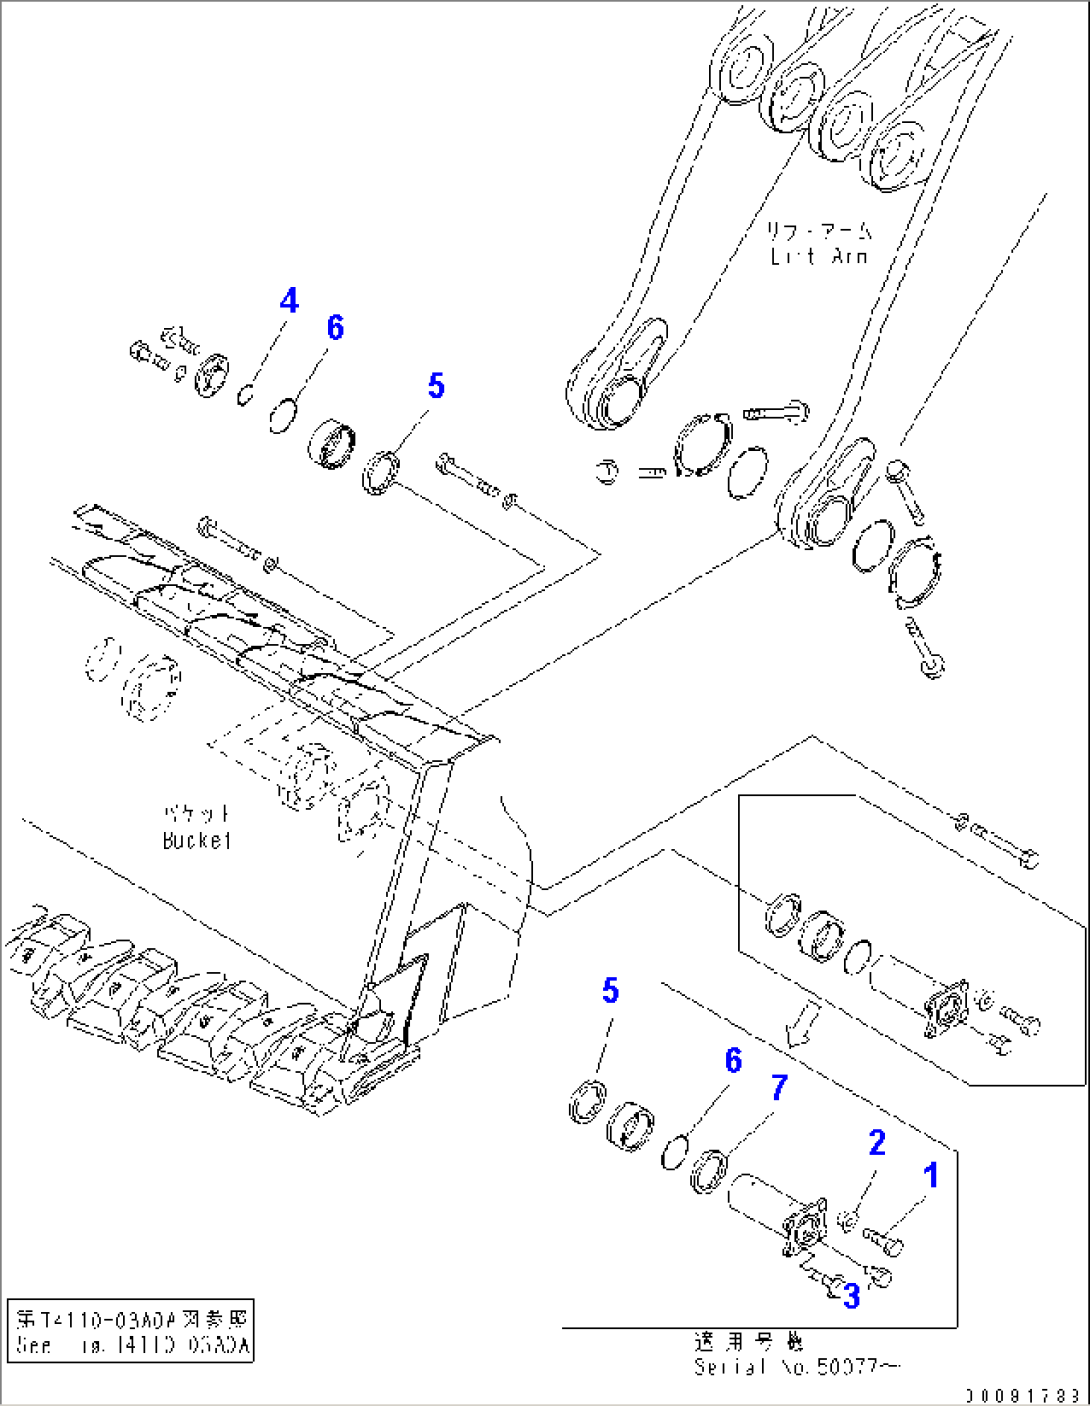 FRONT FRAME (LIFT ARM - BUCKET MOUNTING PARTS)(#50079-)